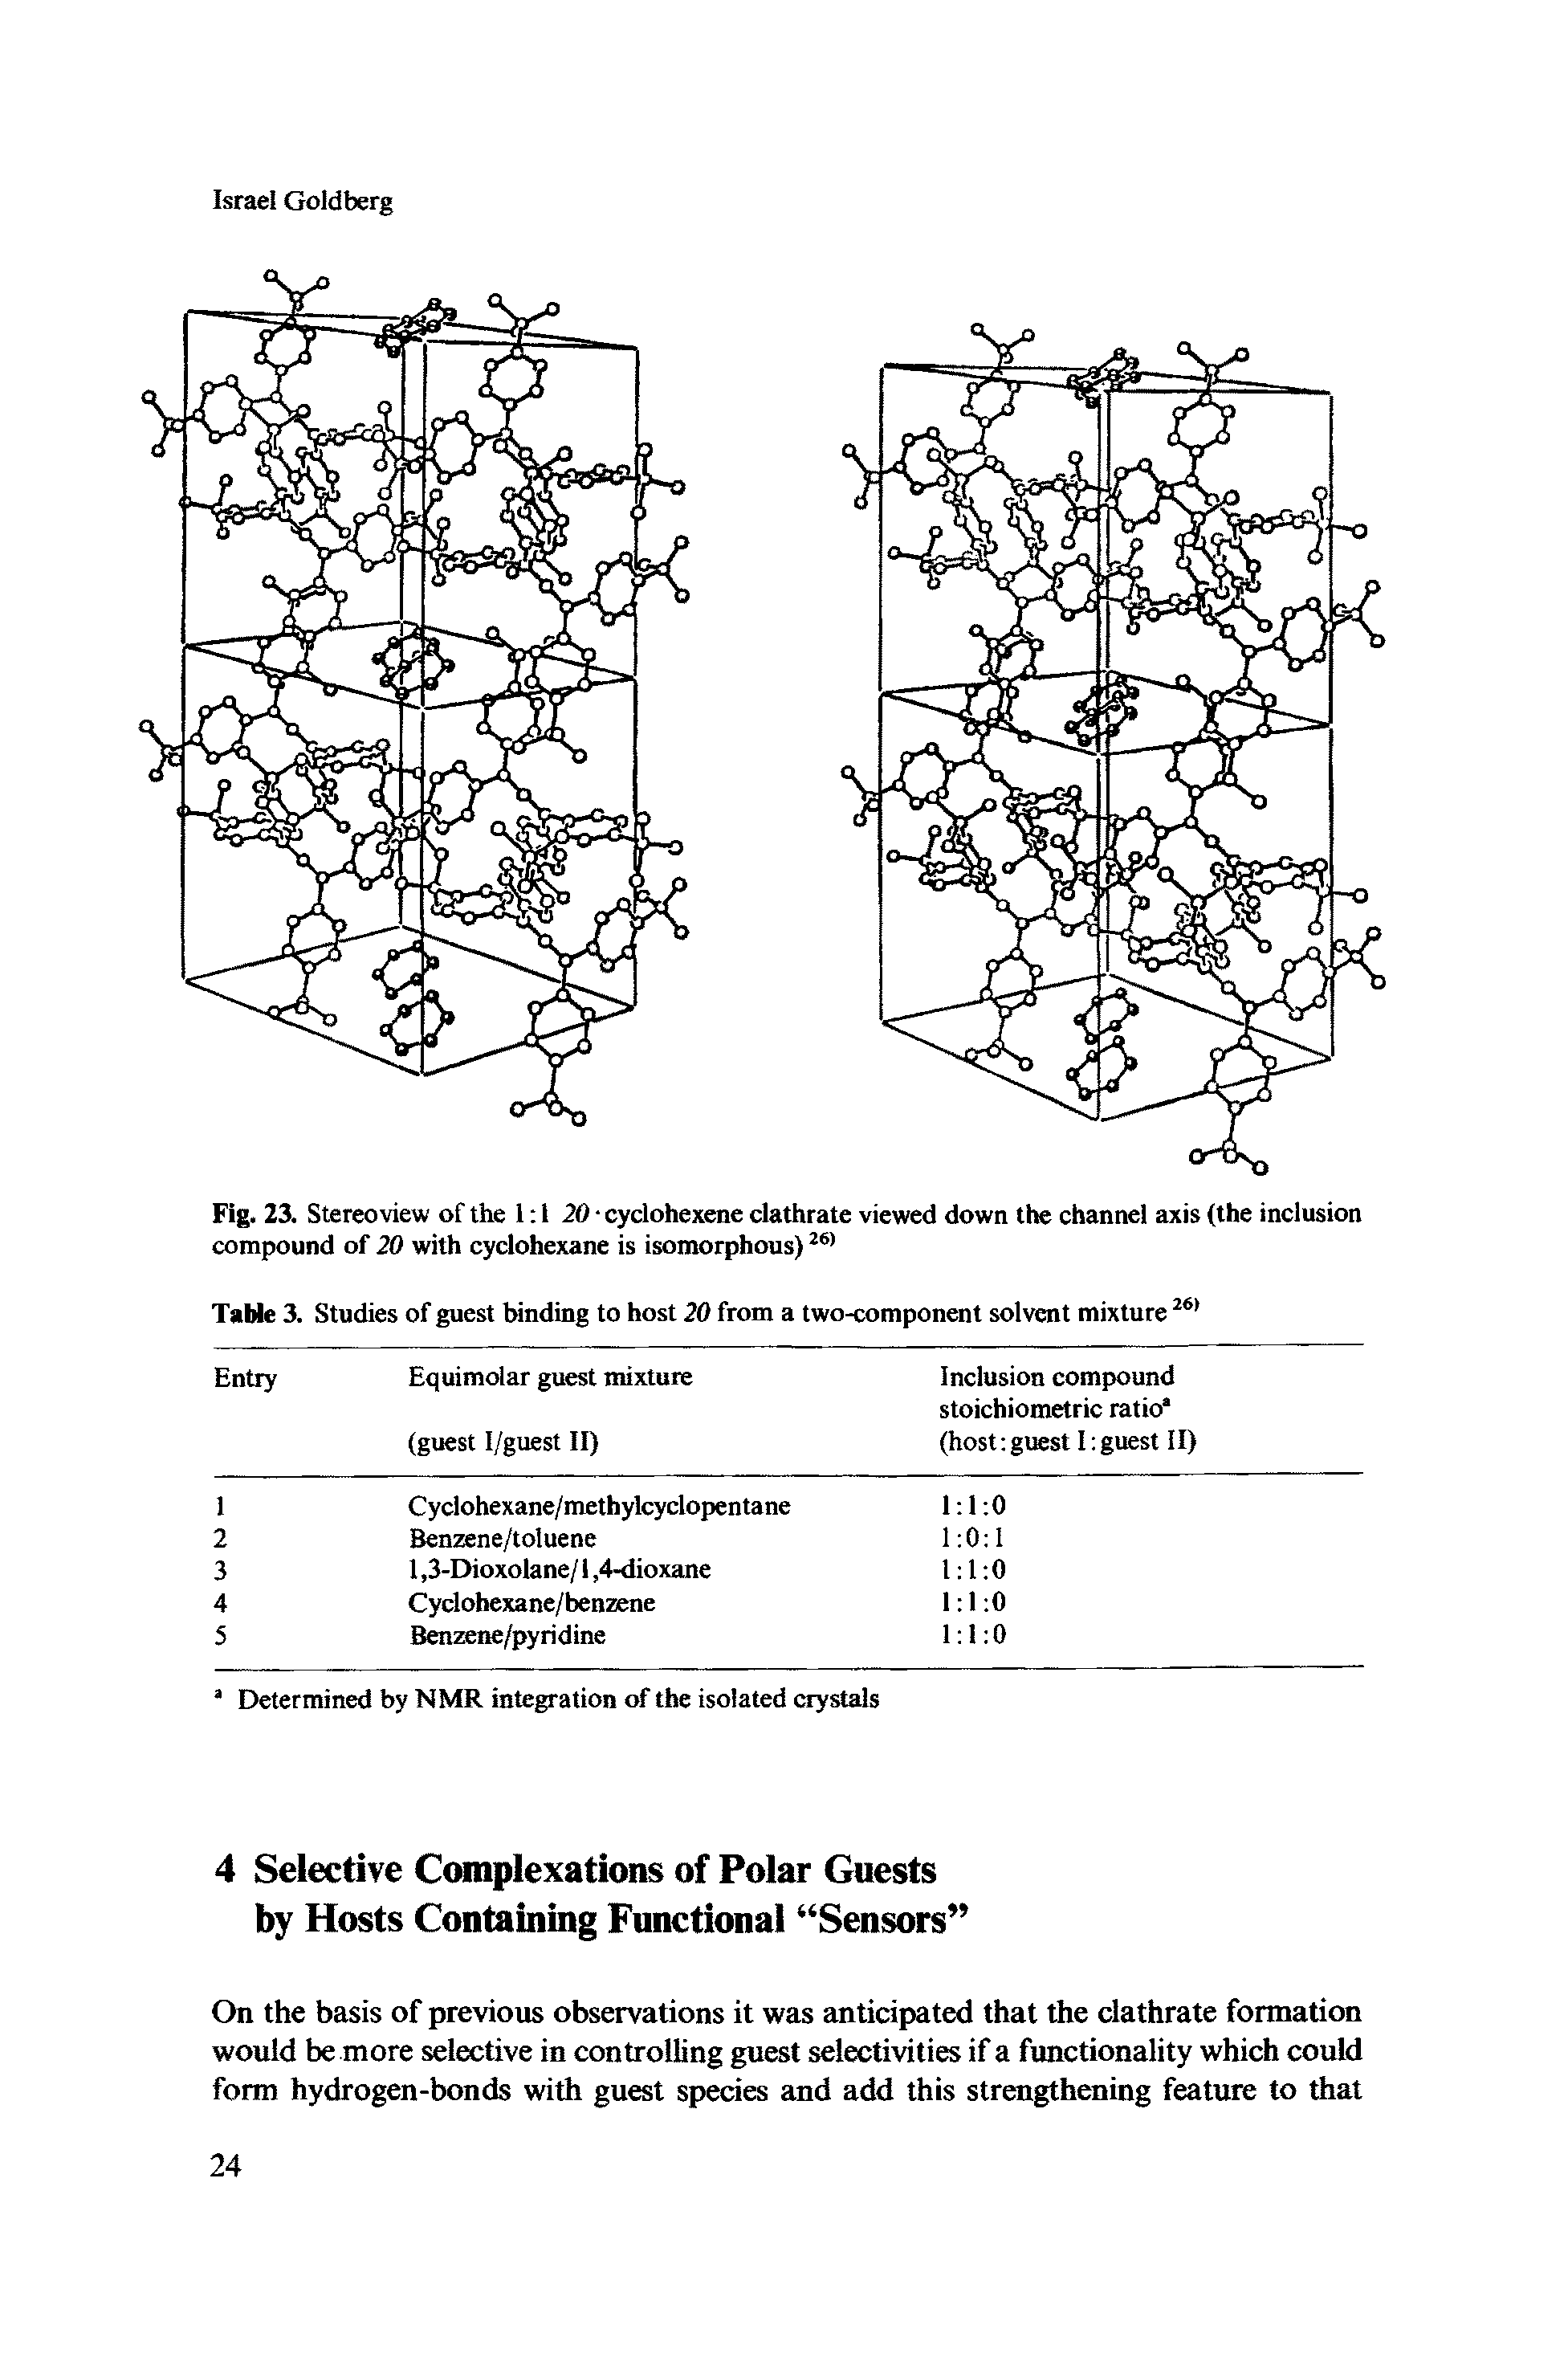 Fig. 23. Stereo view of the 1 1 20 cyclohexene clathrate viewed down the channel axis (the inclusion compound of 20 with cyclohexane is isomorphous)26)...